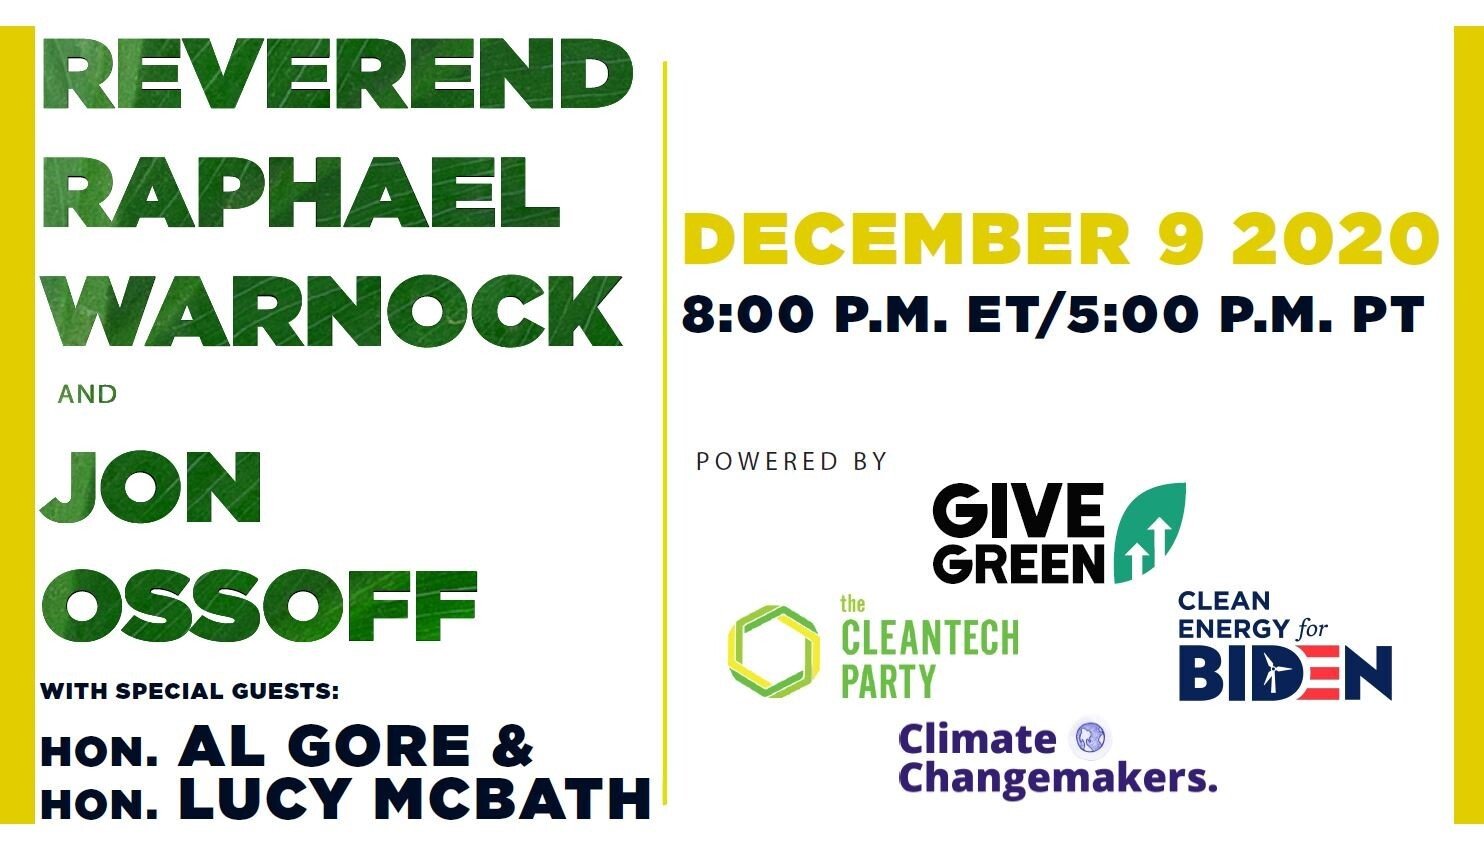 Please join GA Senate candidates for a conversation on climate and clean energy as we approach the January 5th special elections